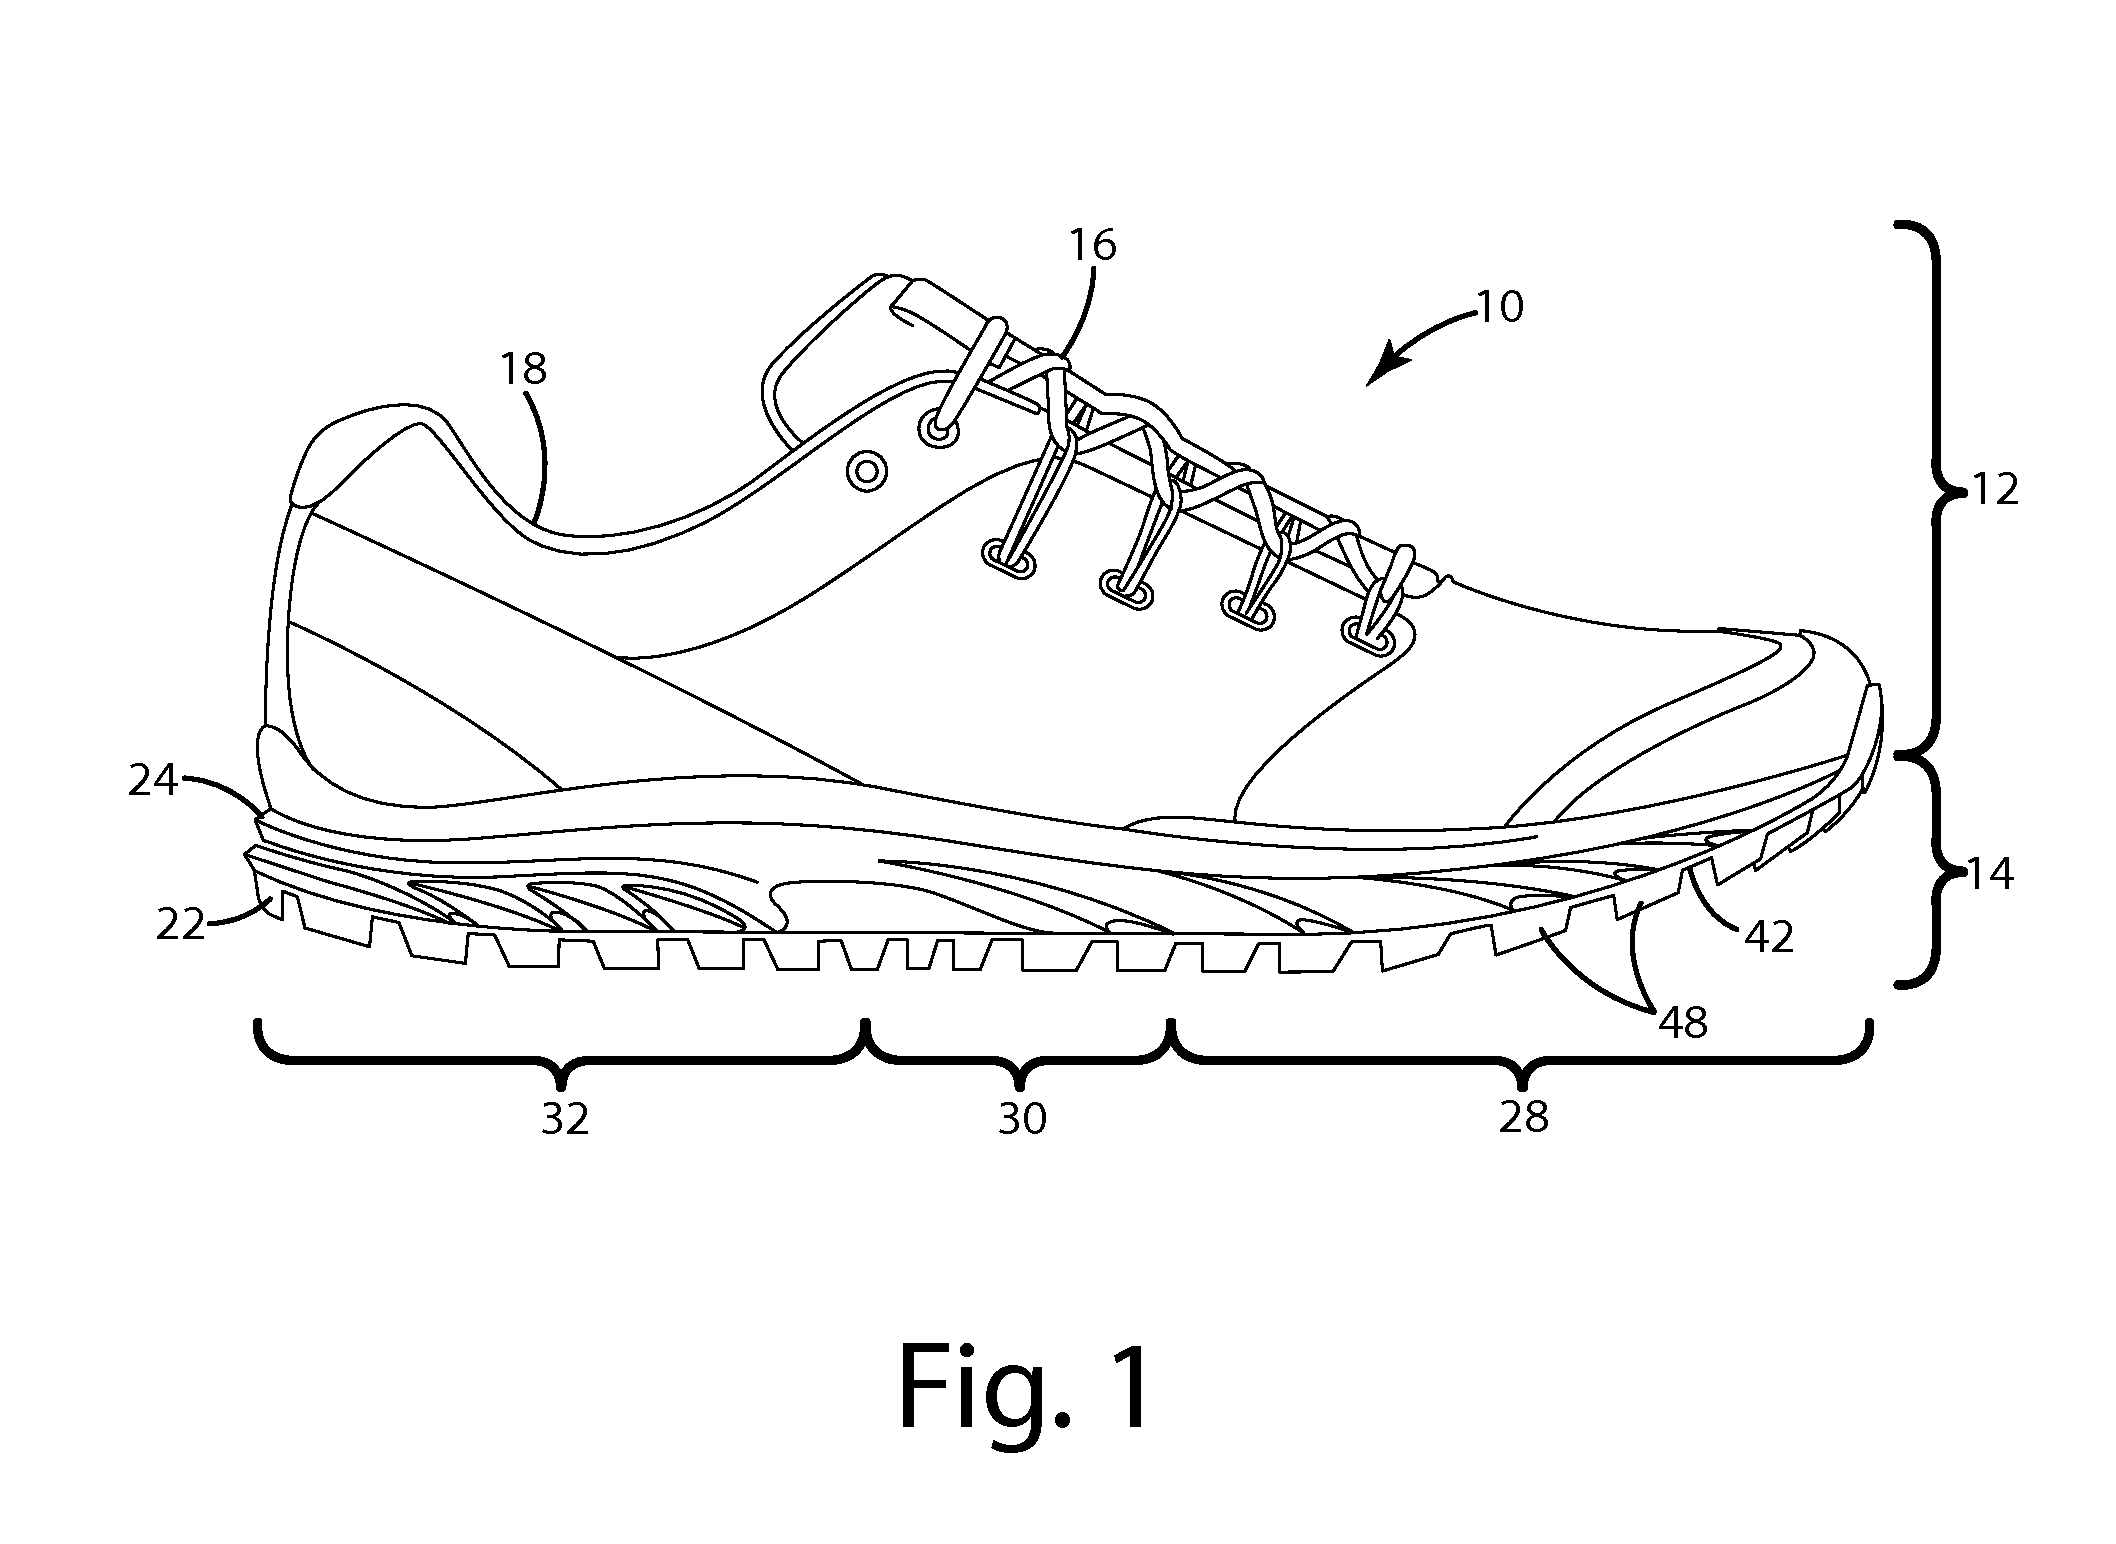 Flexible article of footwear and related method of manufacture